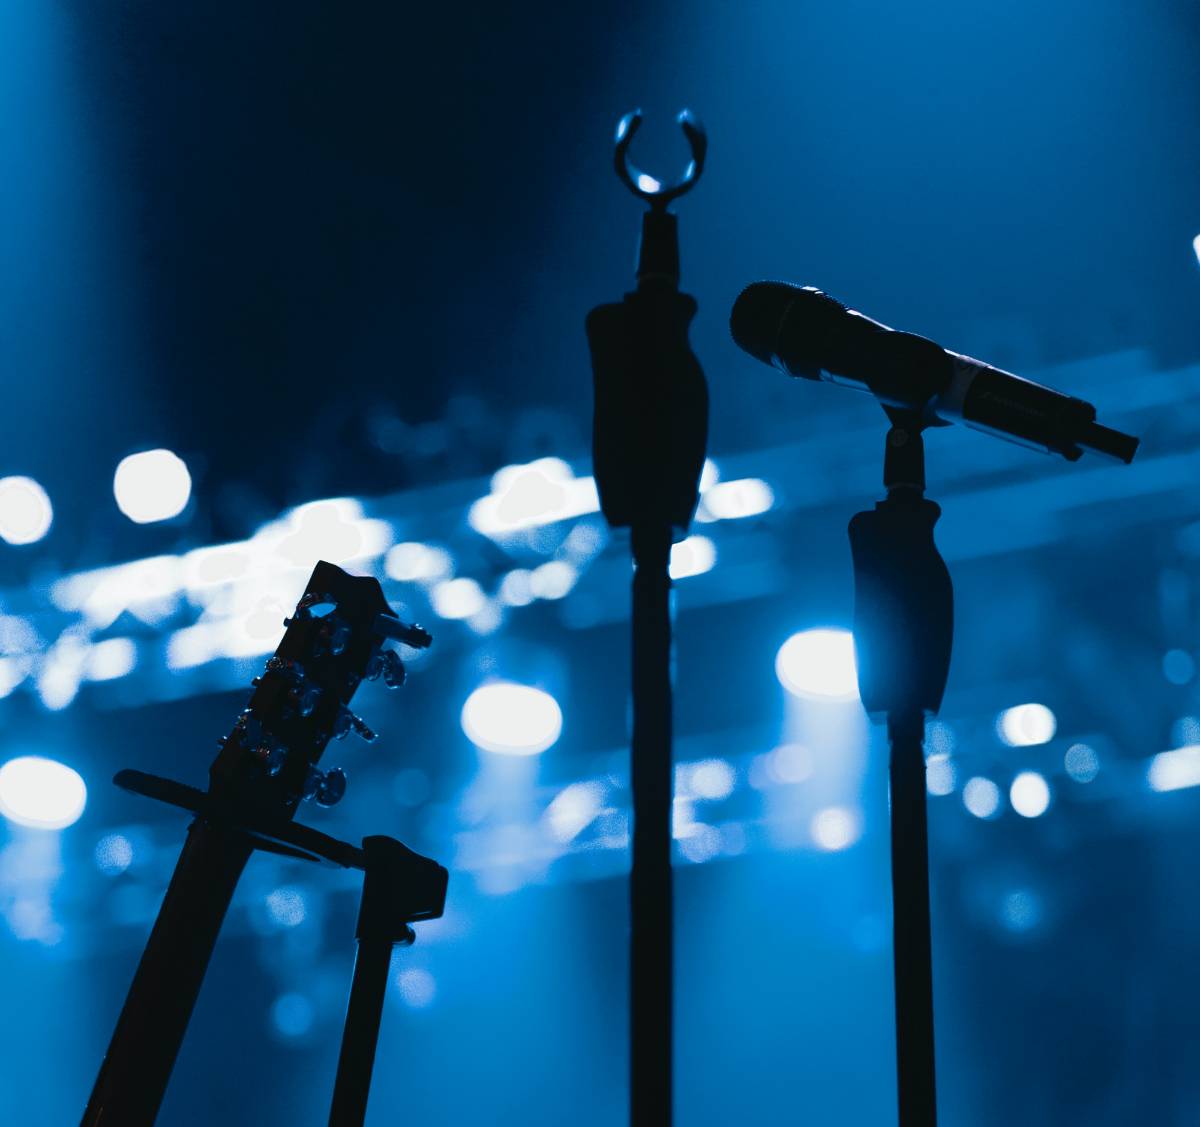 guitar and microphone on stage in blue lighting